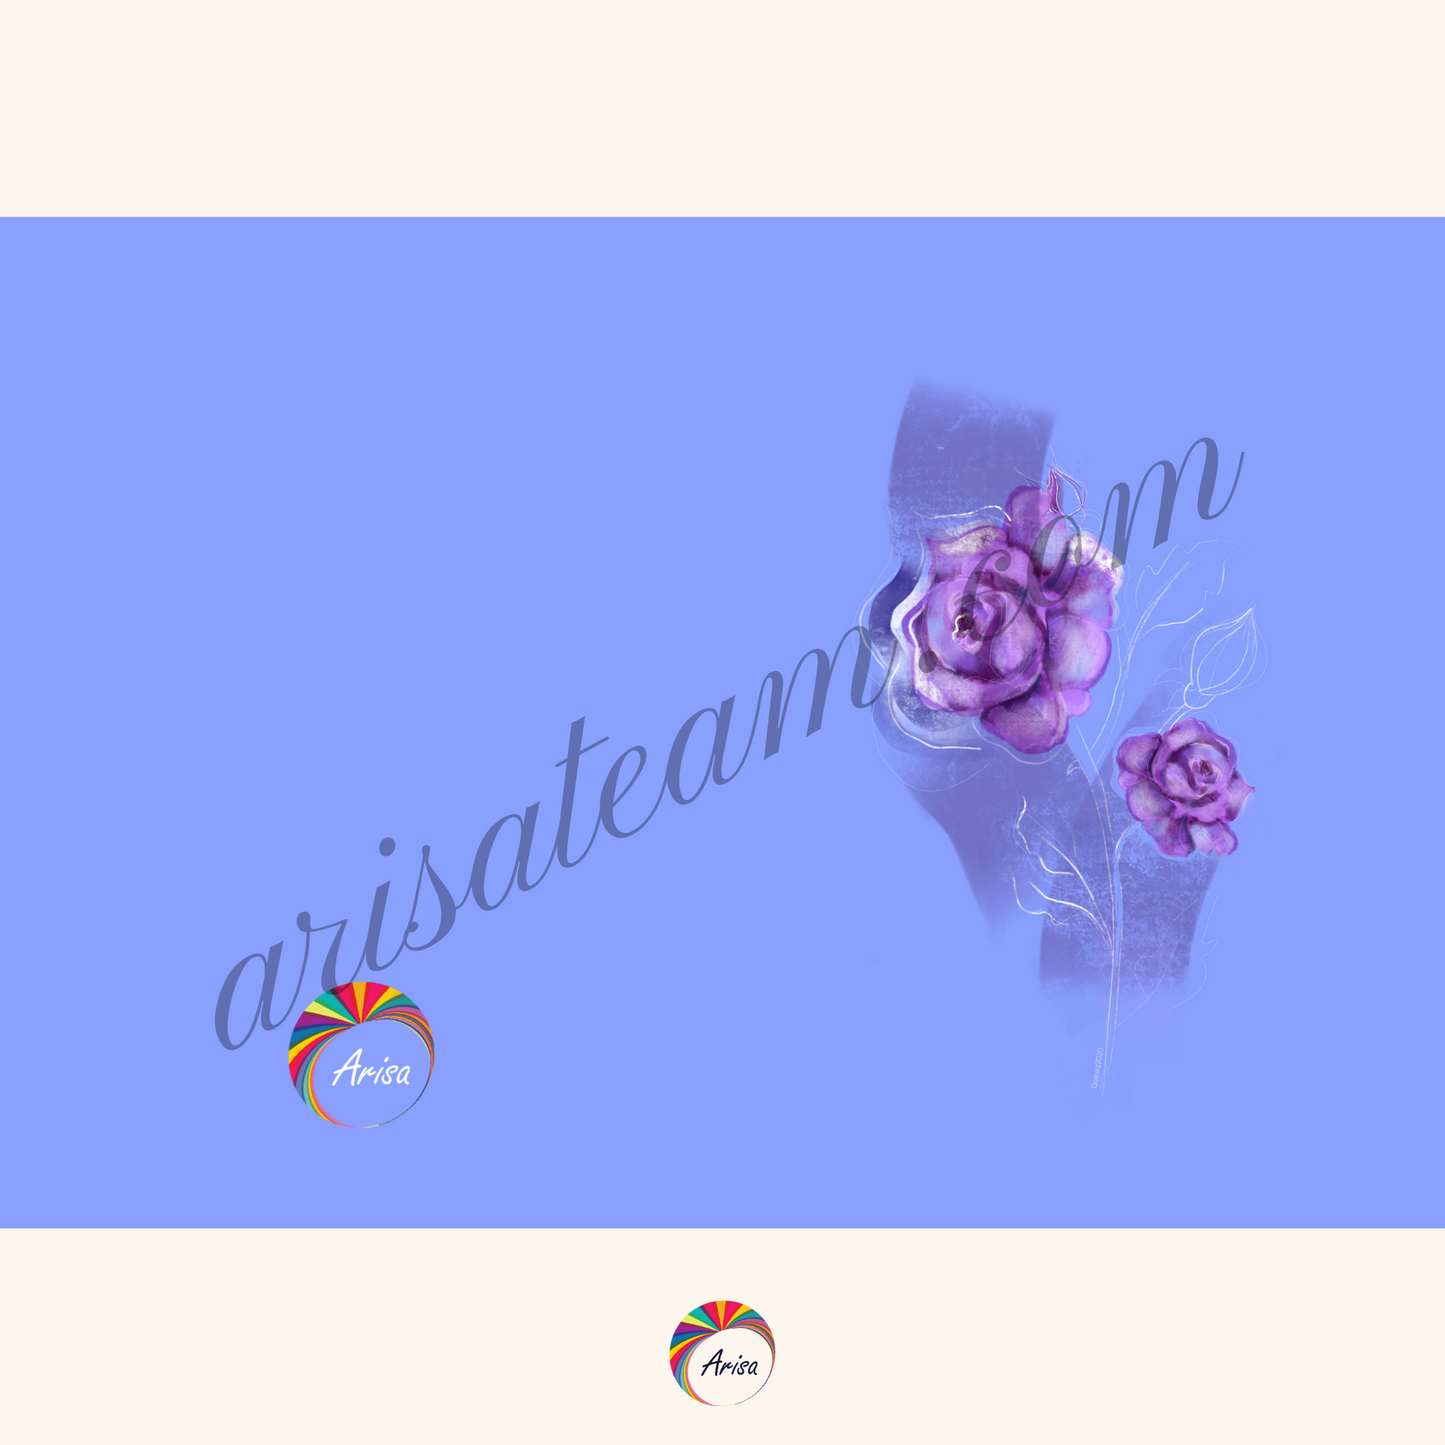 "ROSE" Greeting Card by ArisaTeam in complete form before folding.